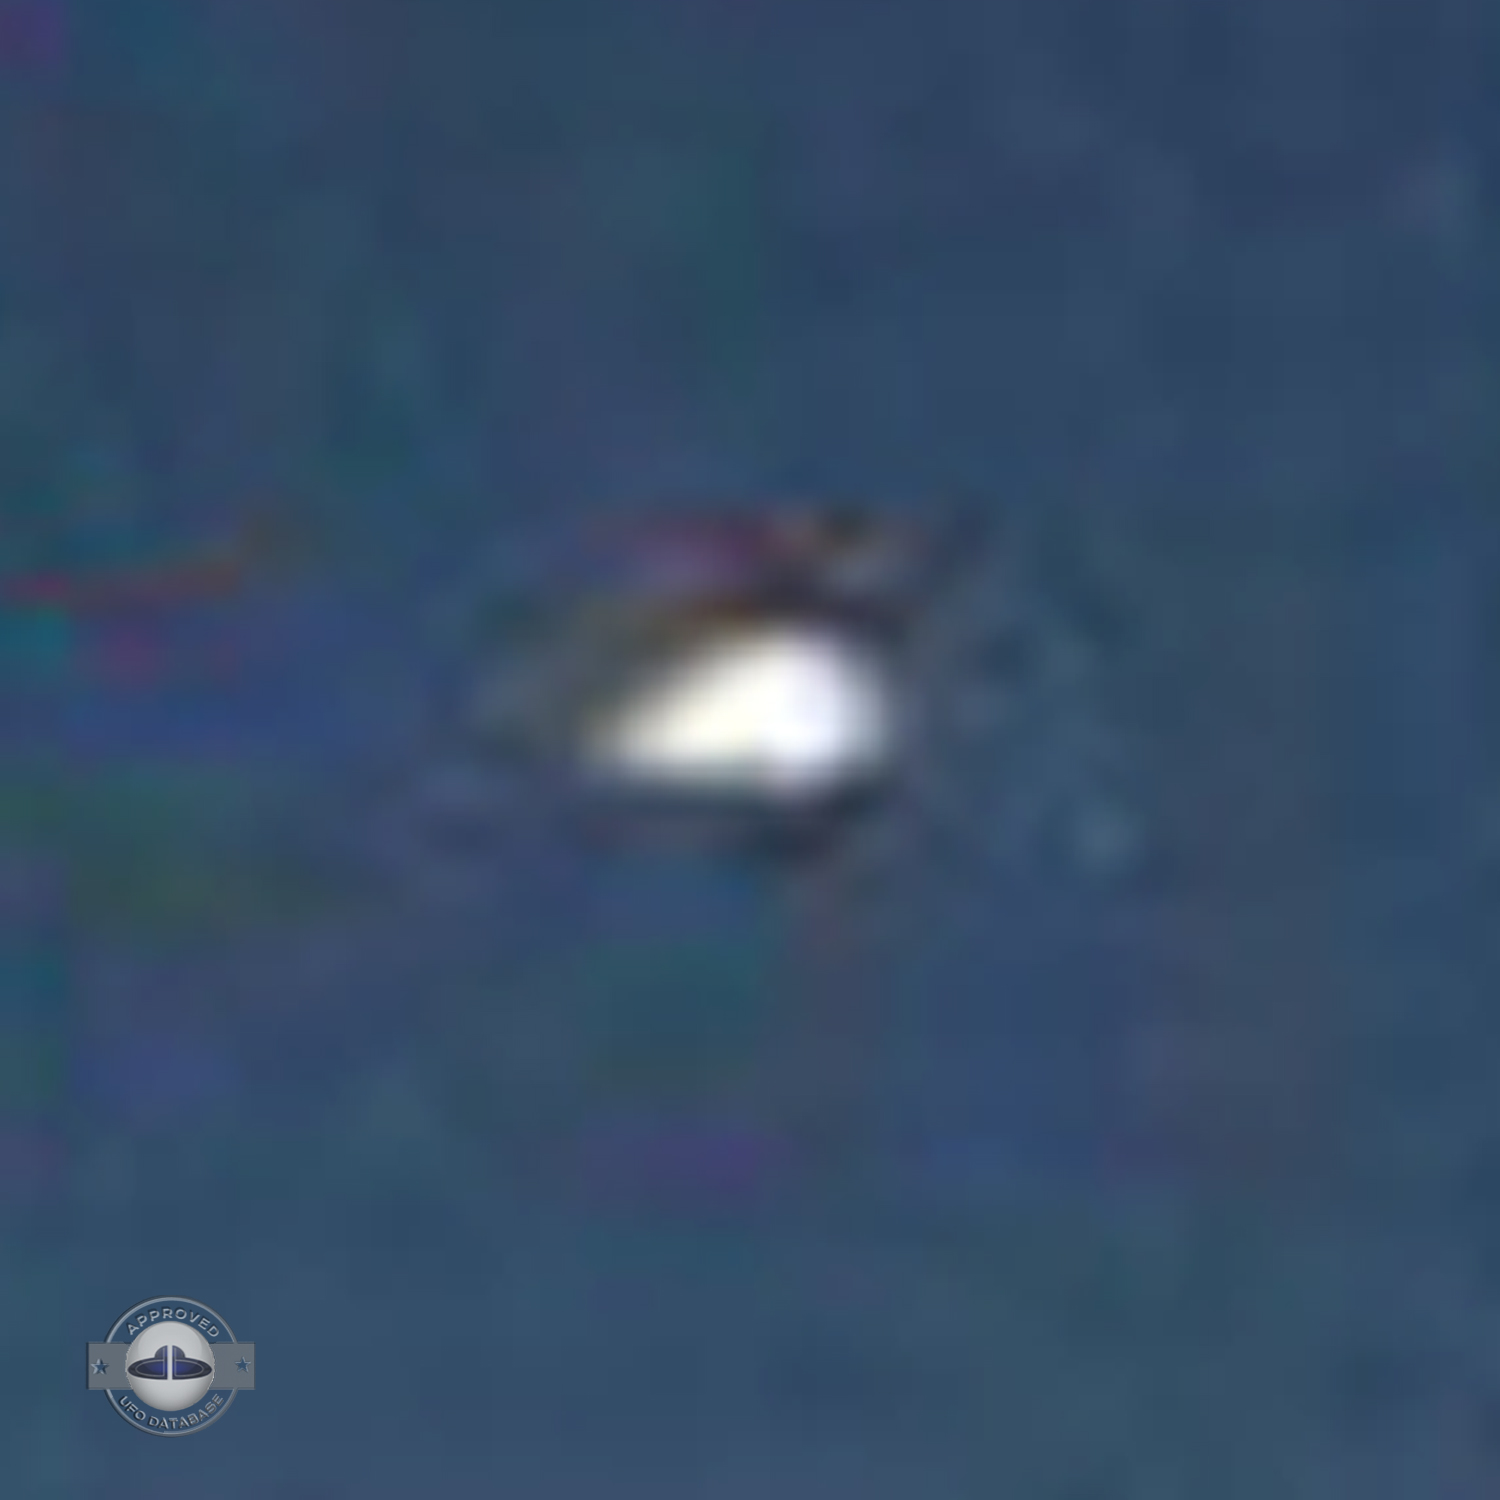 UFO seen over India between New Delhi to Guwahati | UFO picture 2008 UFO Picture #195-6